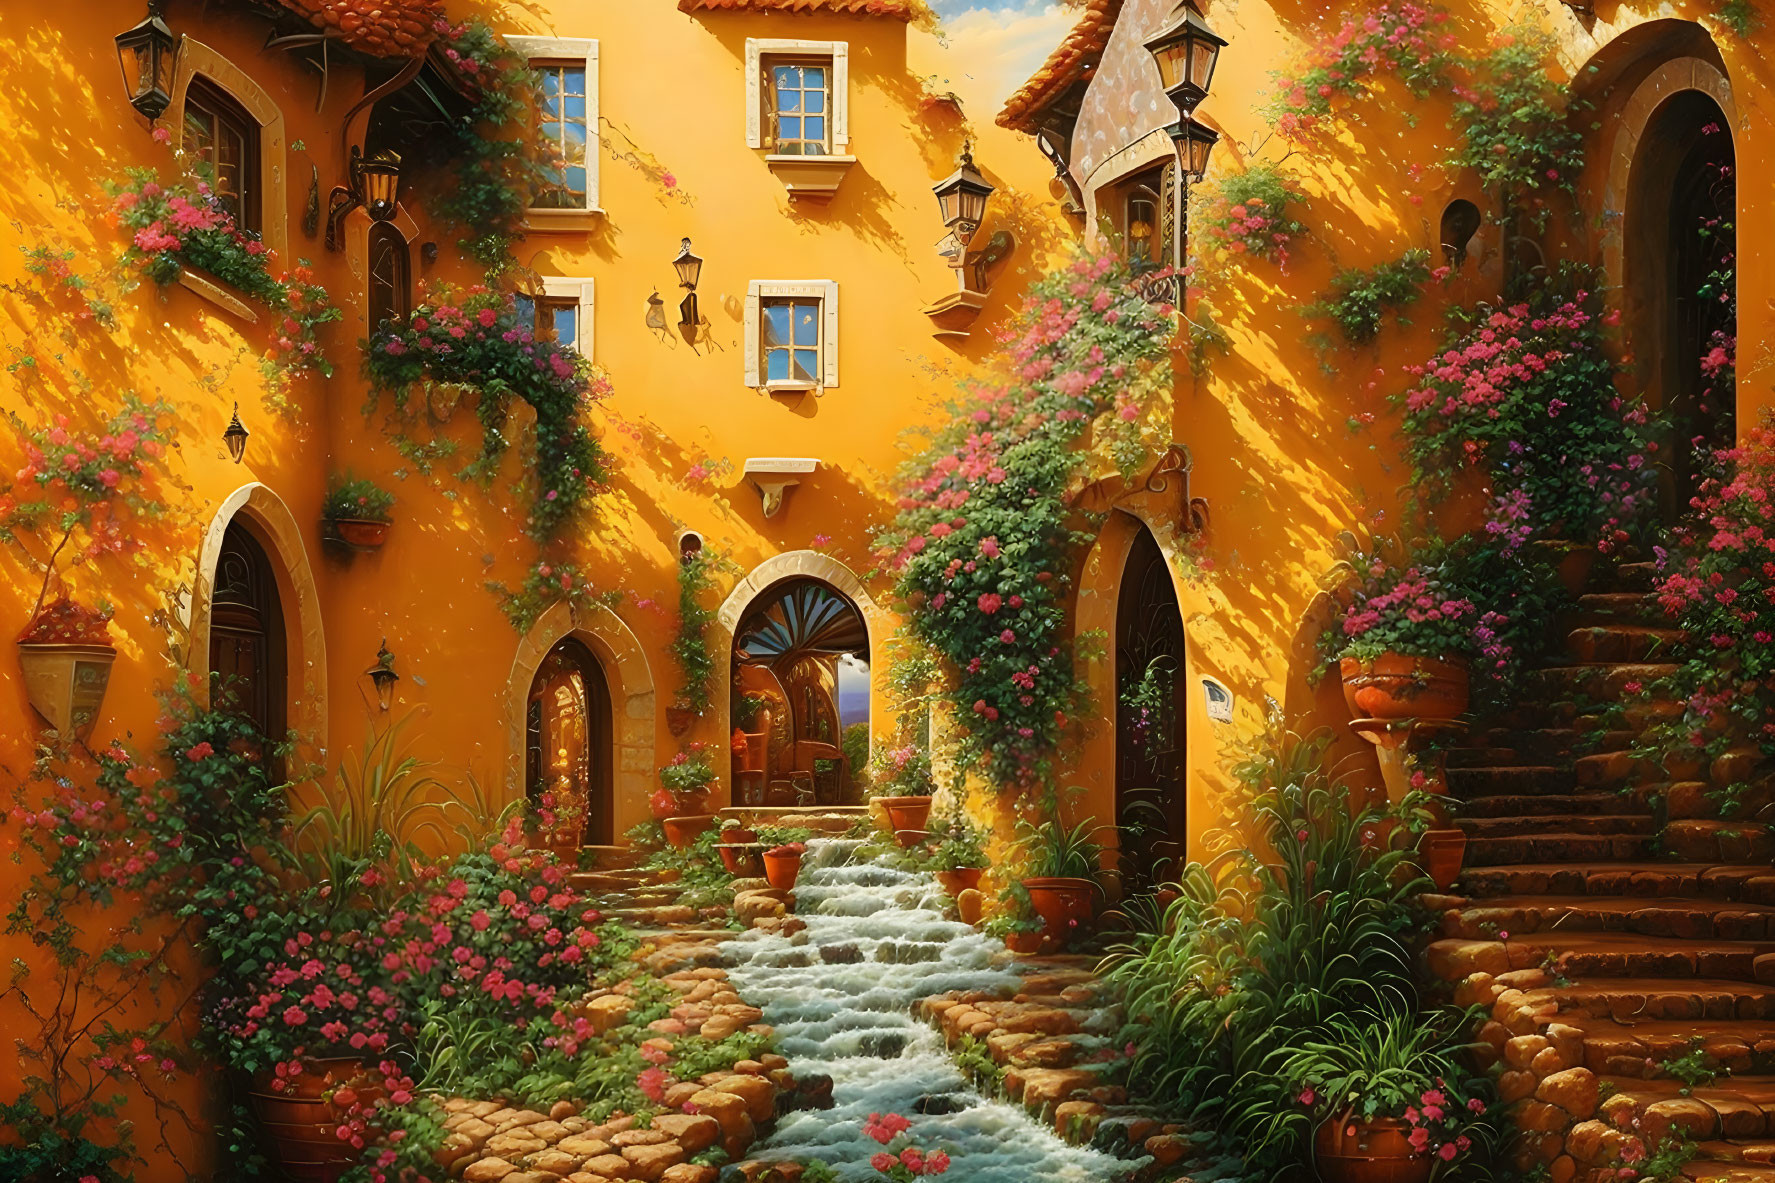 Vibrant flowering plants and traditional yellow buildings by cascading water stairs